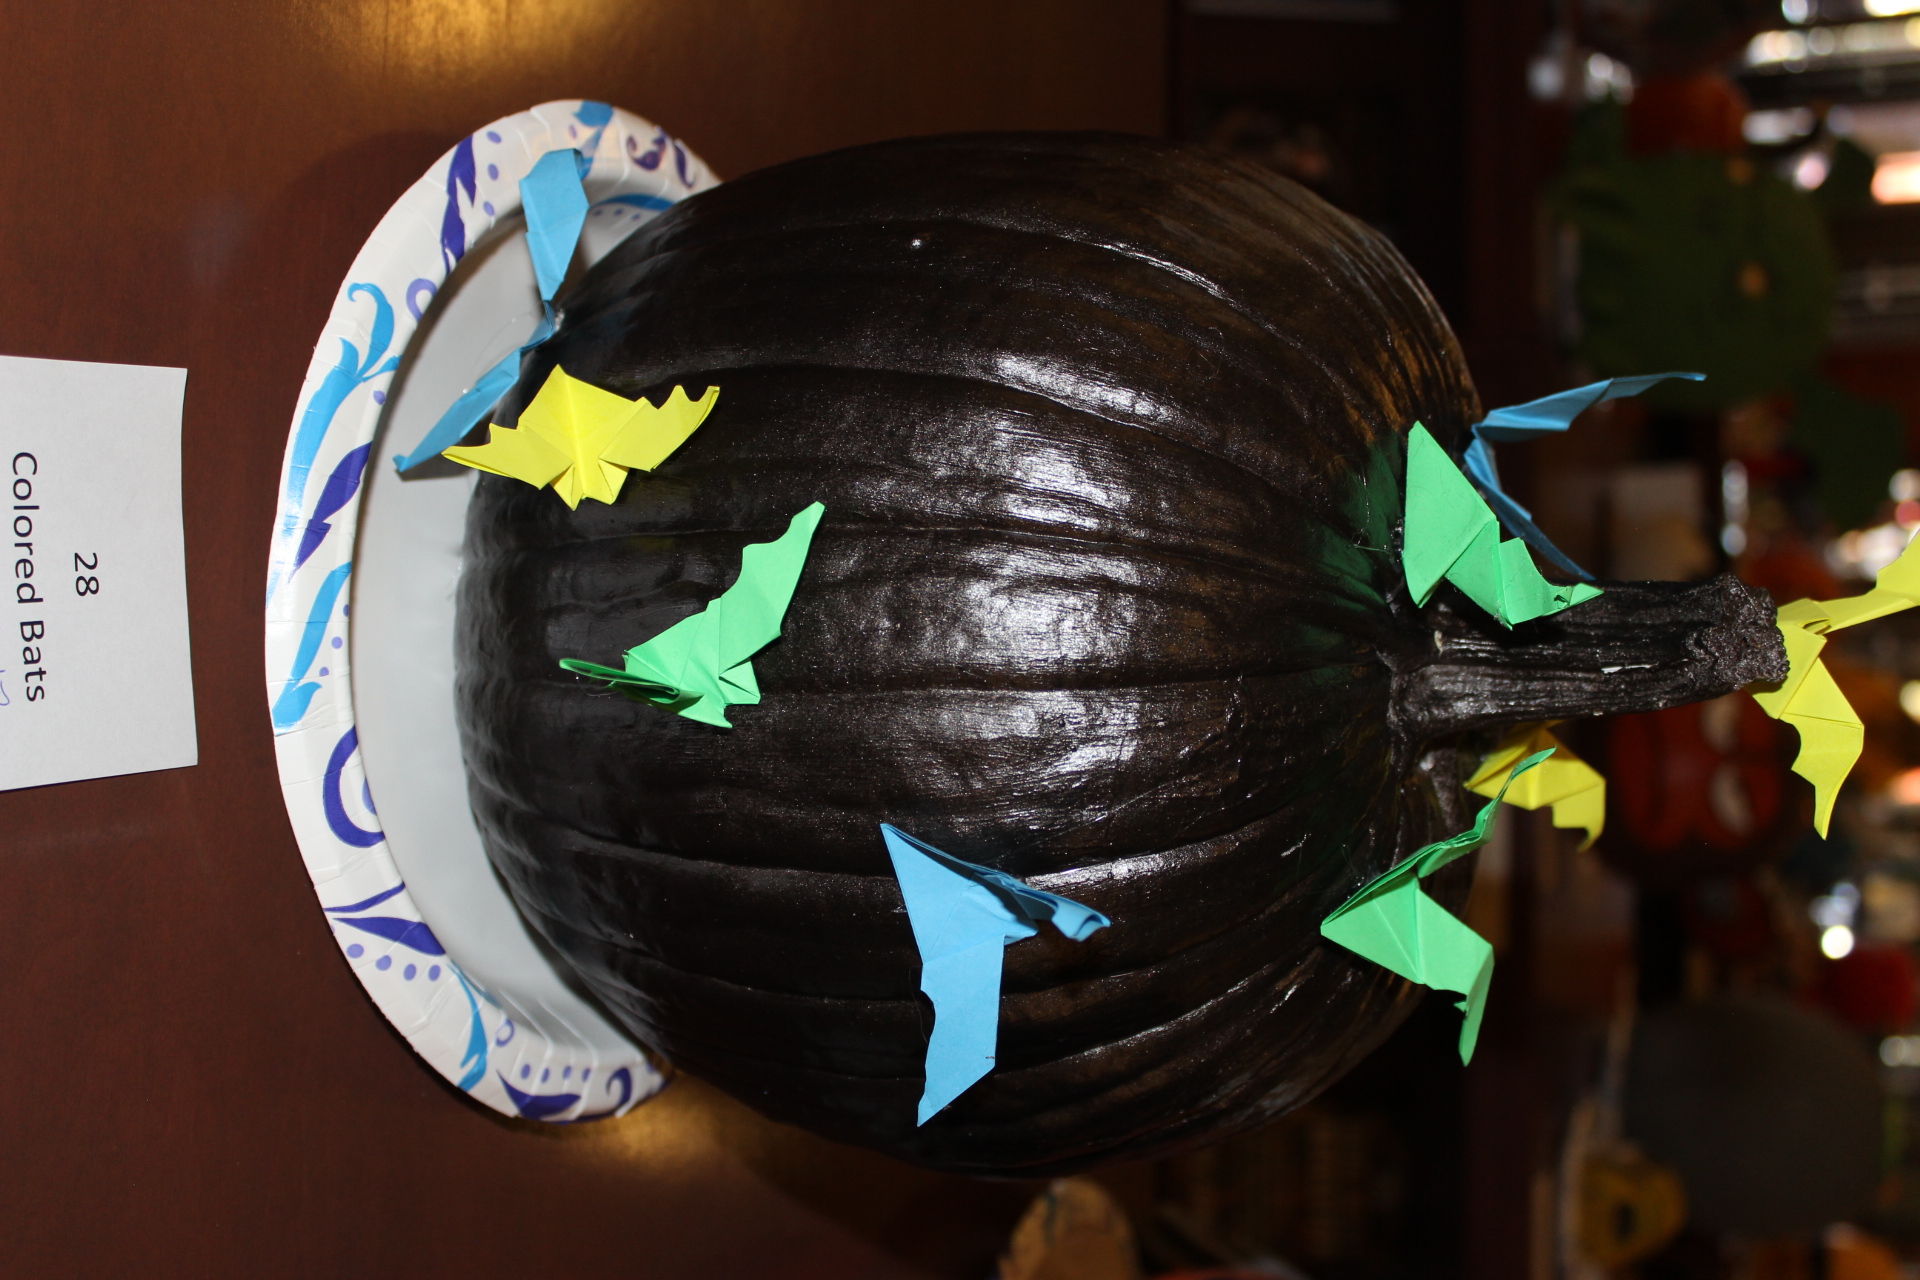 Pumpkin decorated as "Colored Bats"